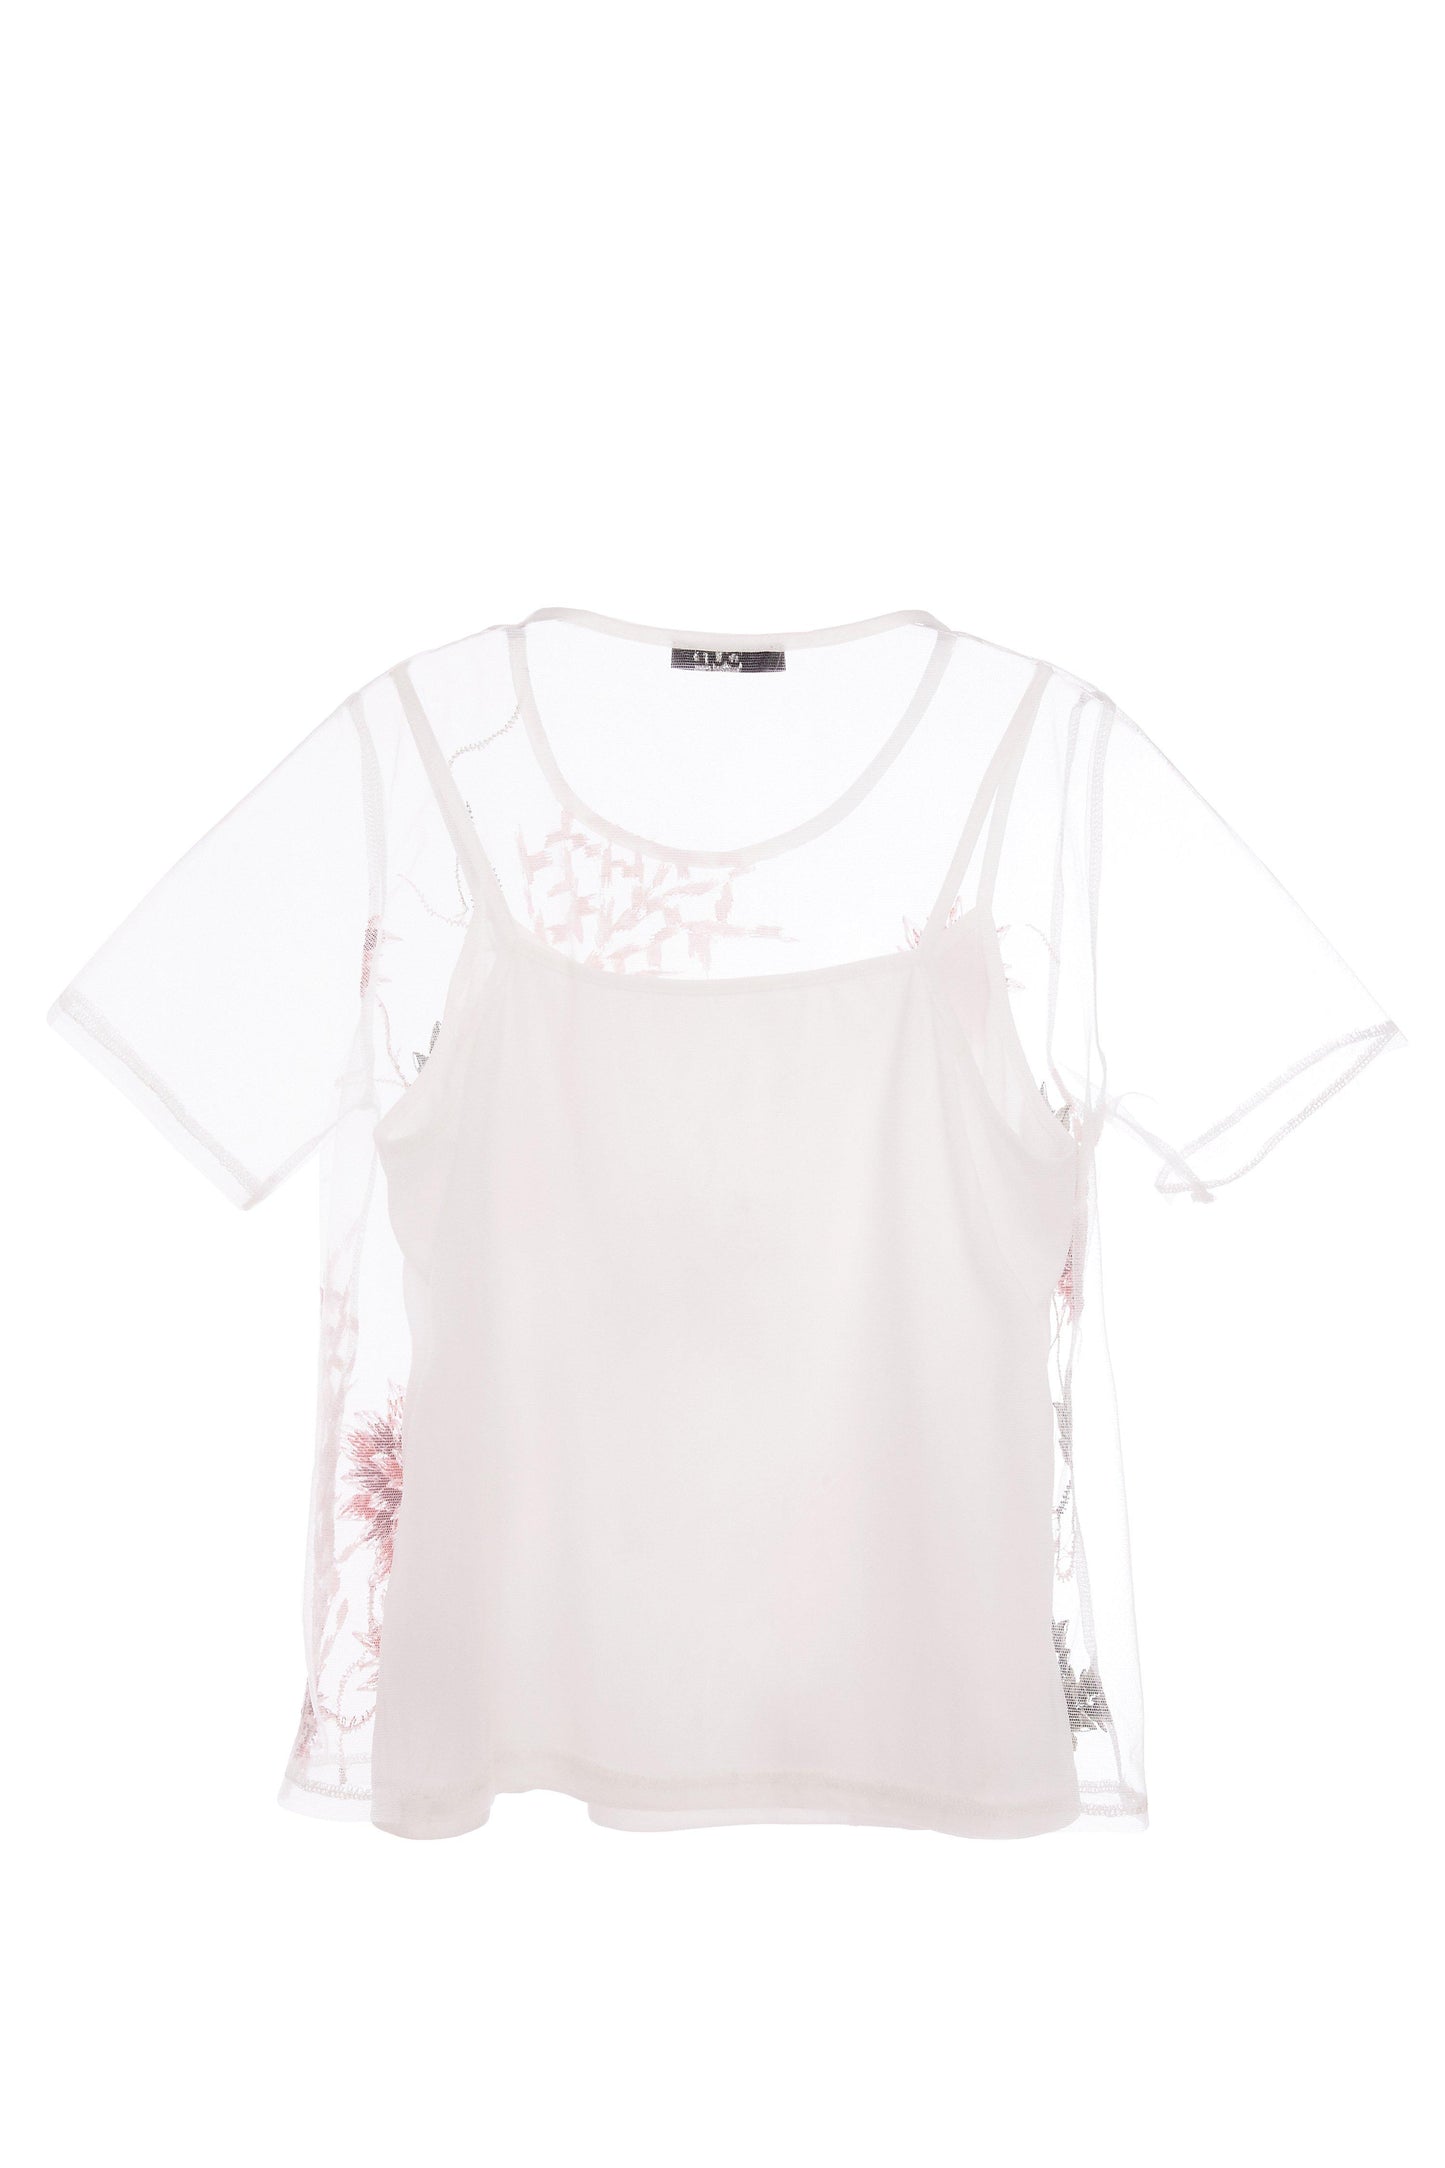 White Mesh Embroidered Short Top